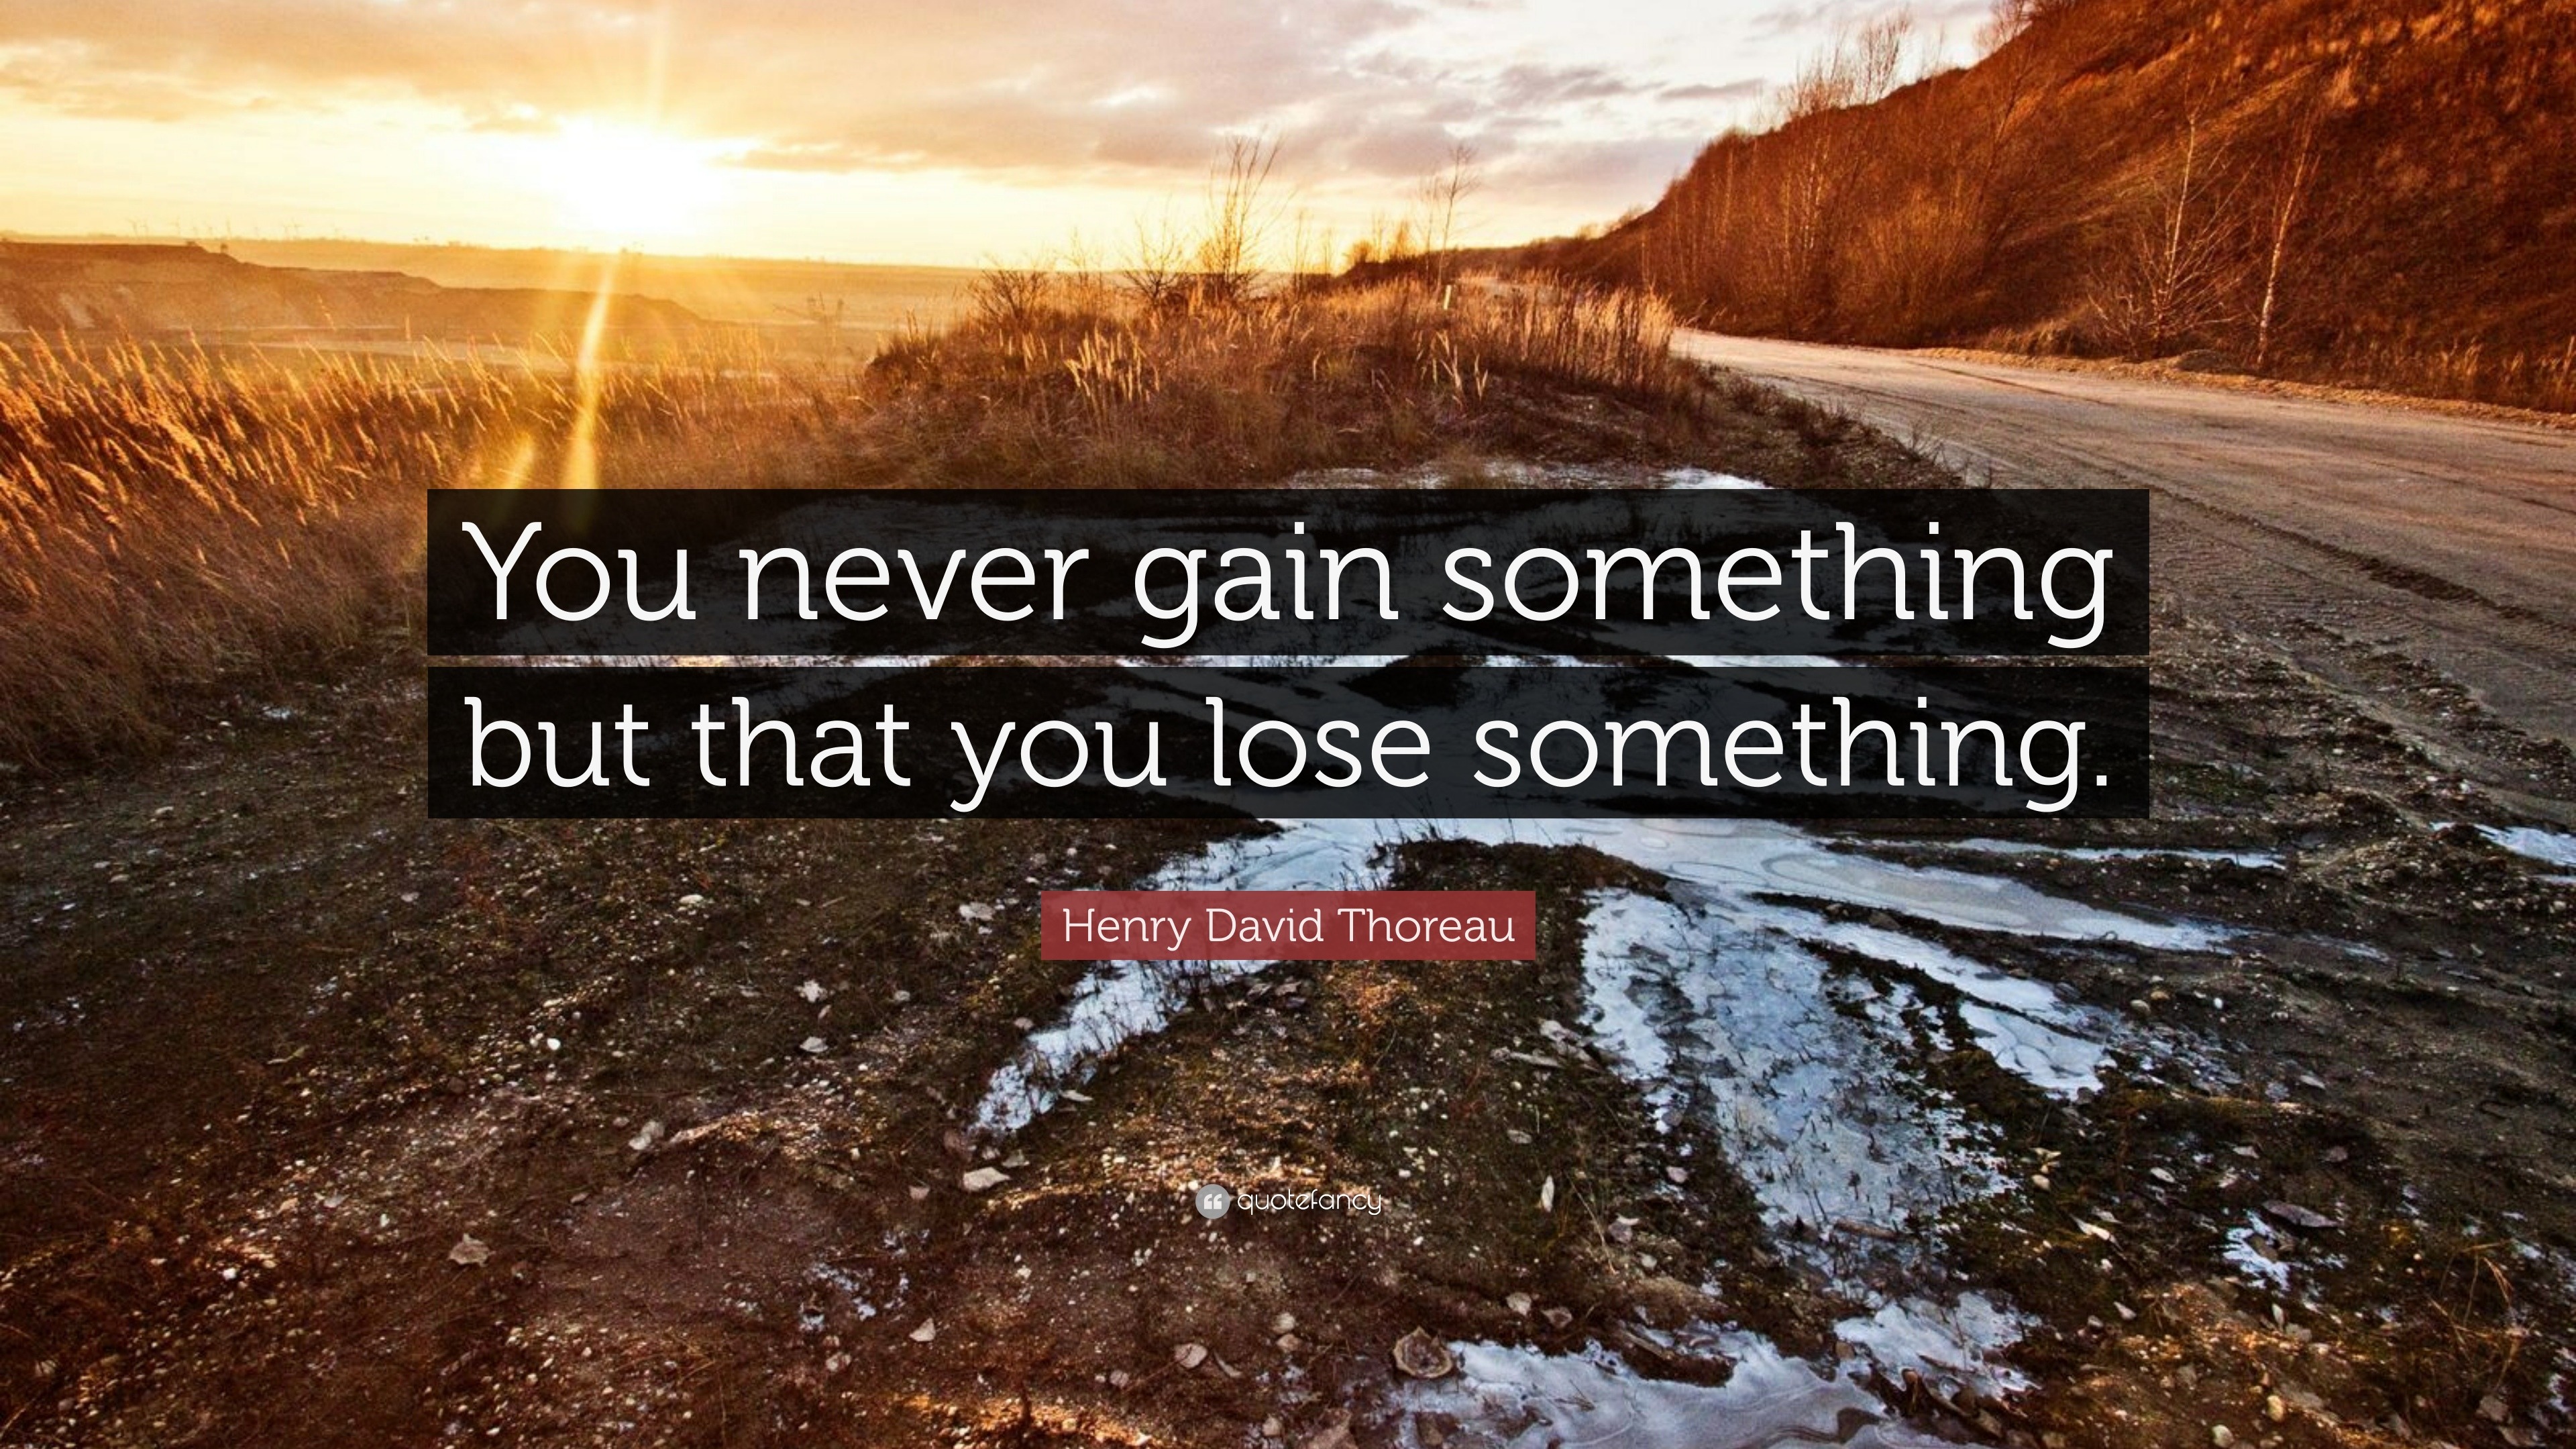 Henry David Thoreau Quote “you Never Gain Something But That You Lose Something” 